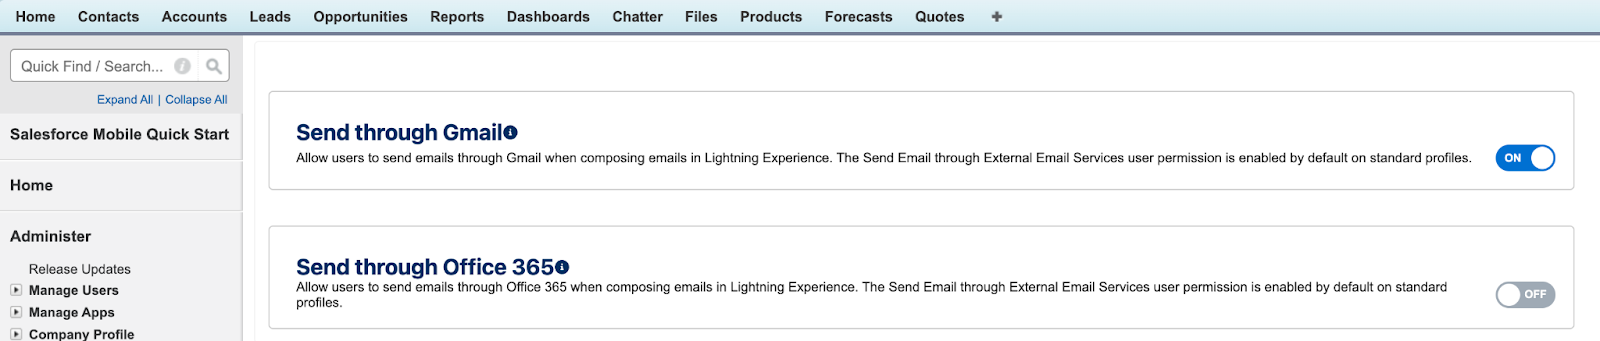 Configuring external email services in Salesforce Classic 